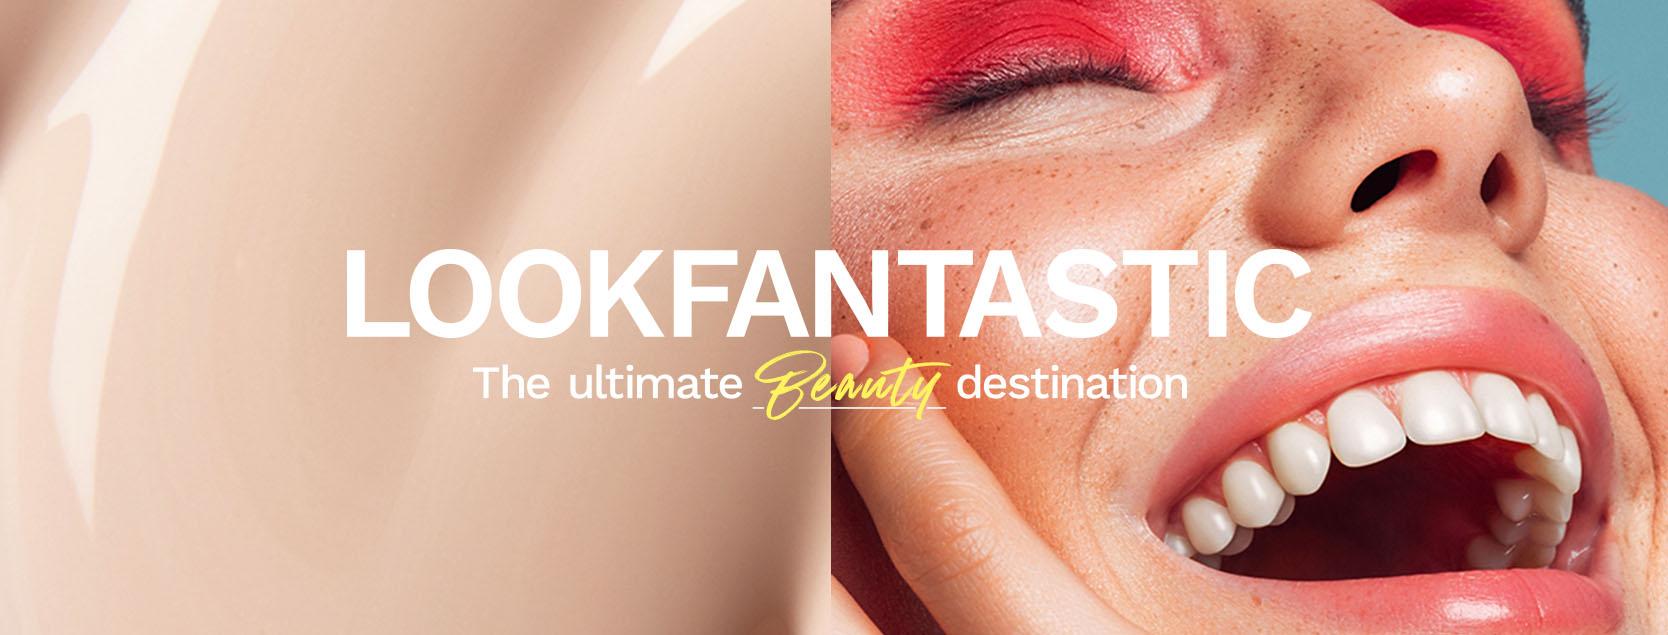 25% Student Discount on the LOOKFANTASTIC App